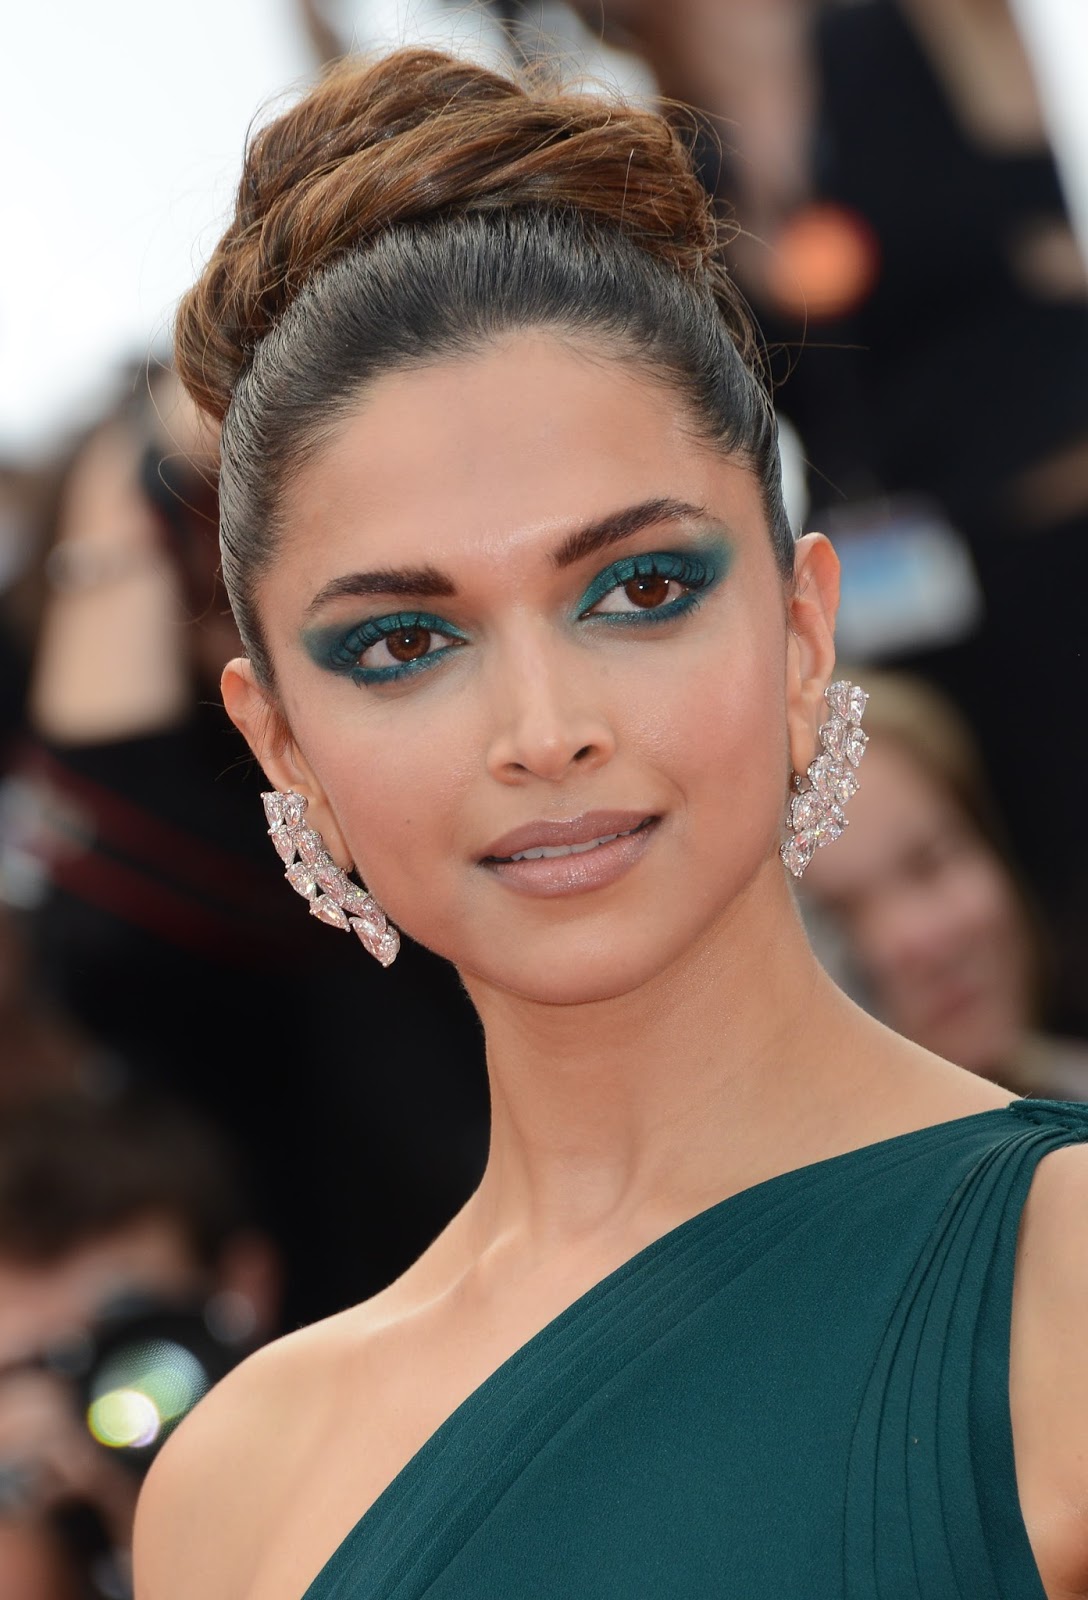 Deepika Padukone Irresistibly Sexy in a Green Brandon Maxwell Gown At 'Loveless (Nelyubov)' Premiere During The 70th Cannes Film Festival 2017